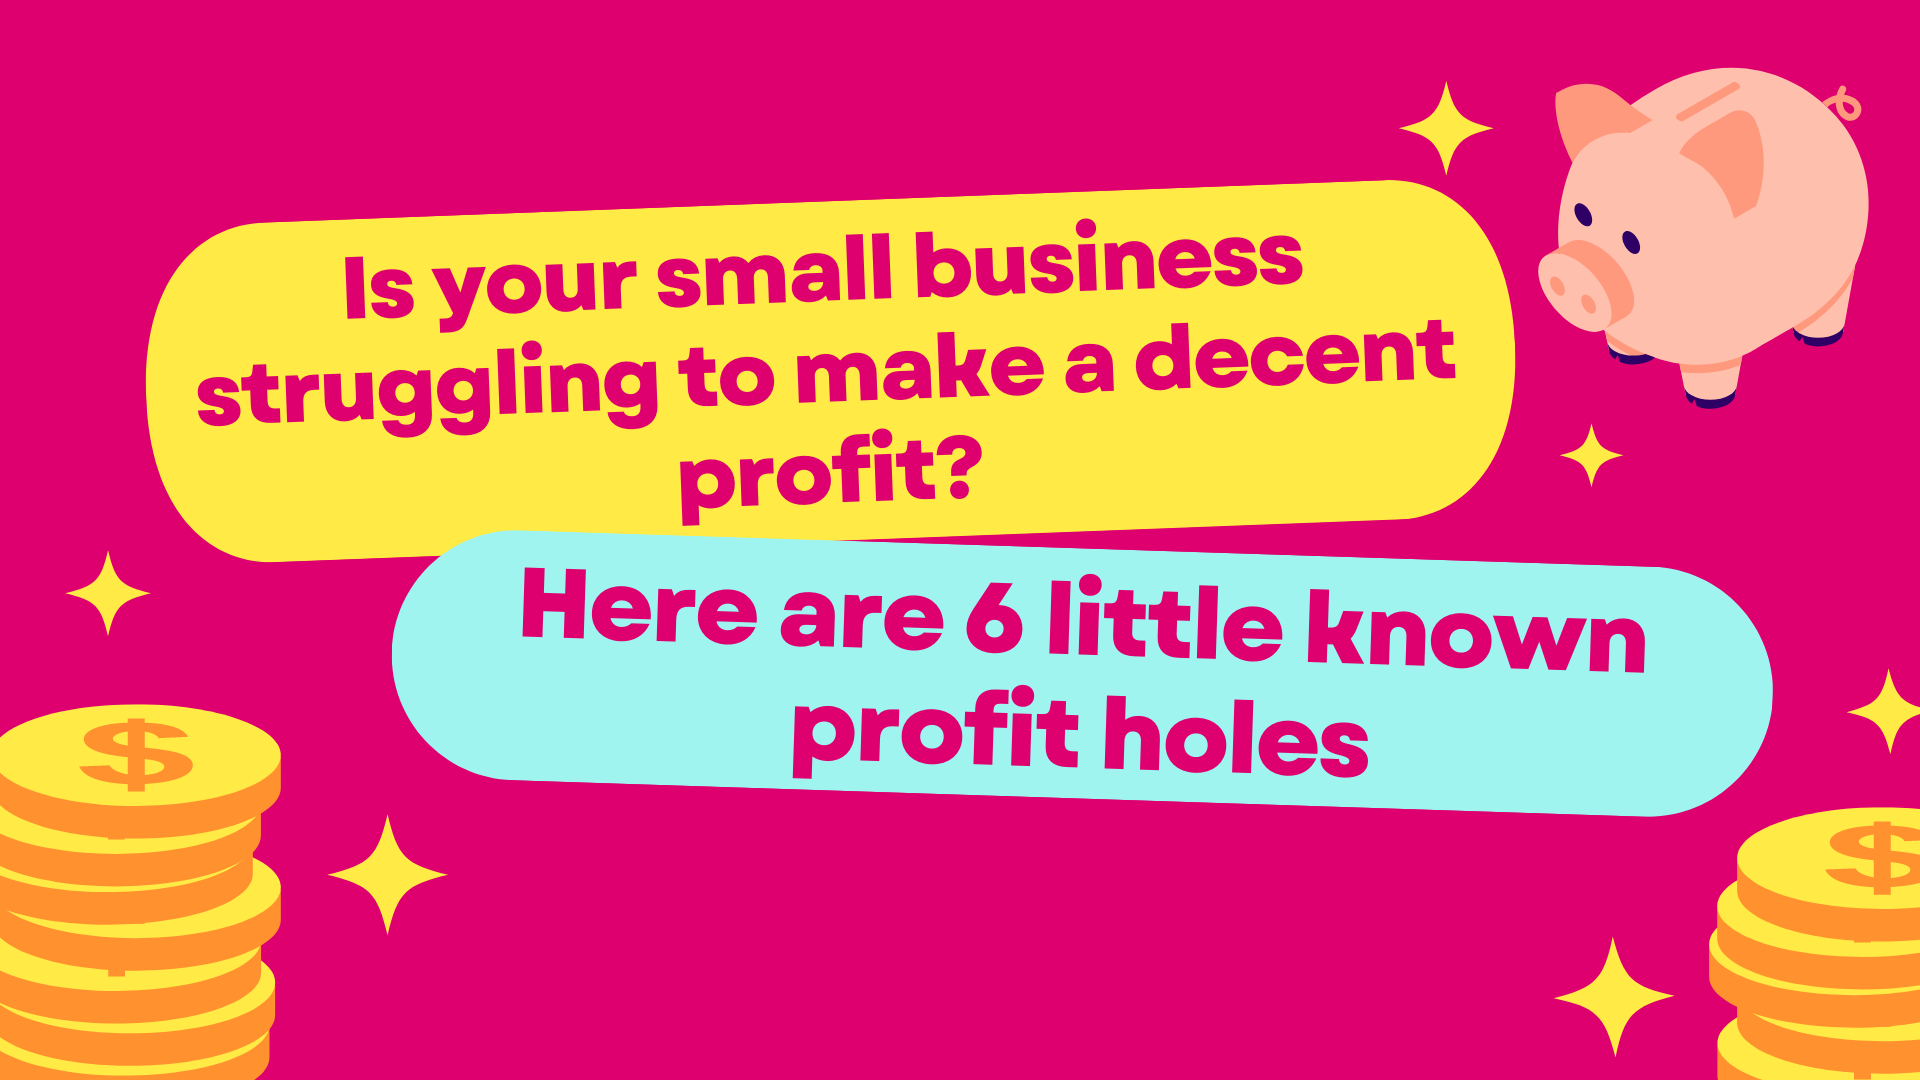 Is your small business struggling to make a decent profit? Here are six little known profit holes.